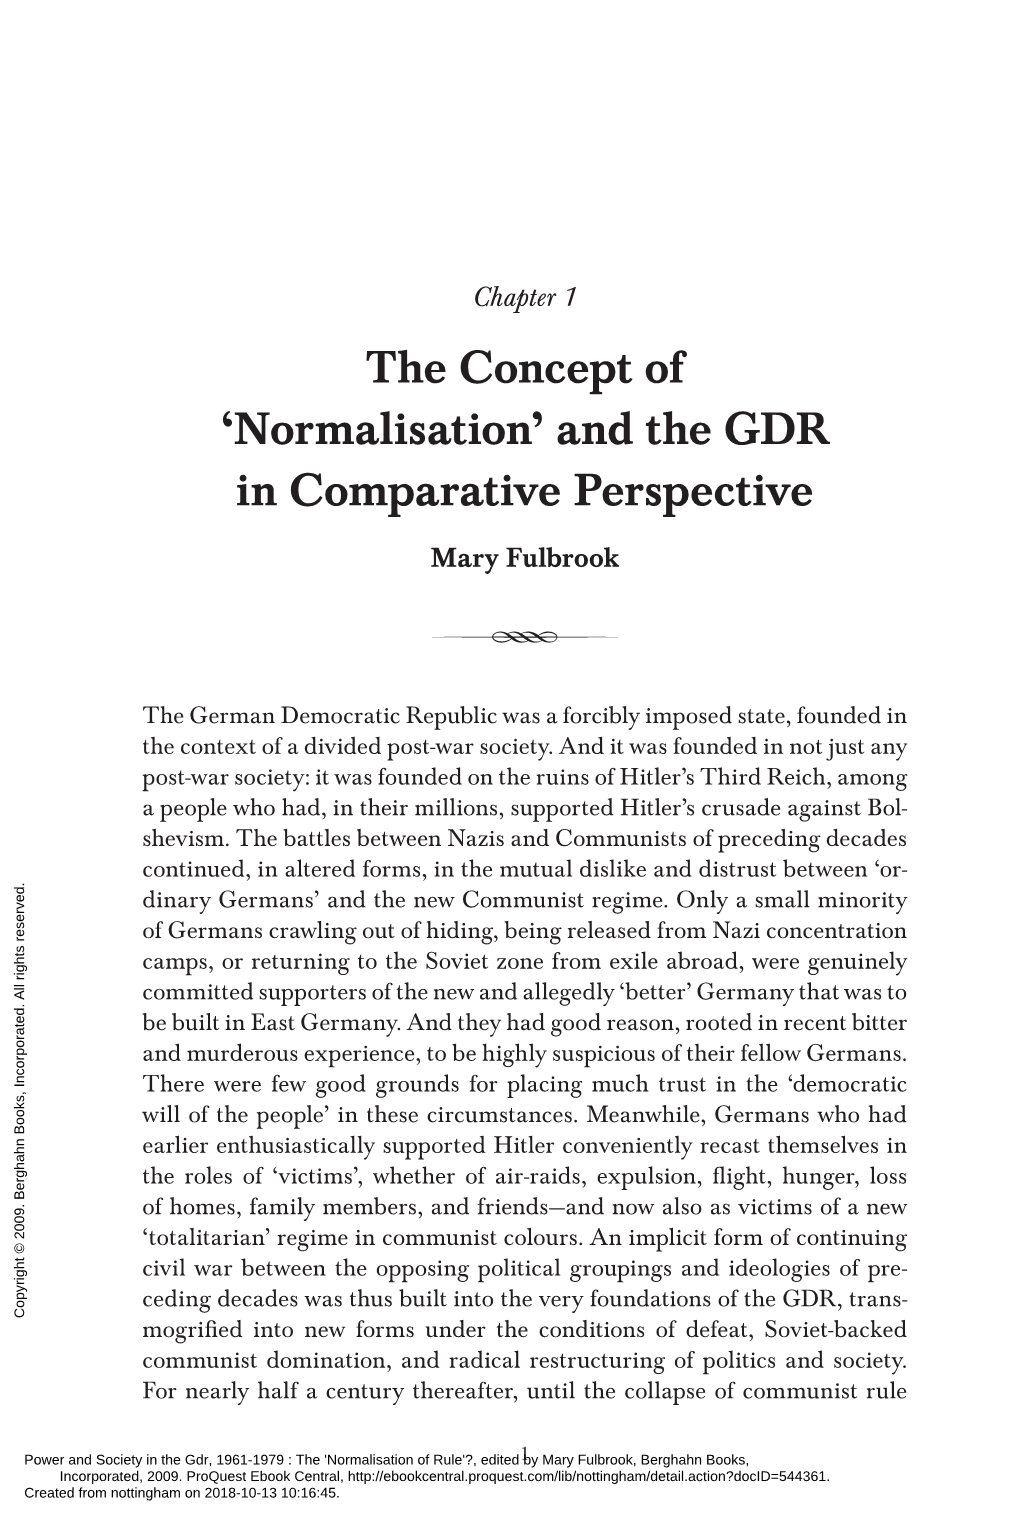 The Concept of 'Normalisation' and the GDR in Comparative Perspective